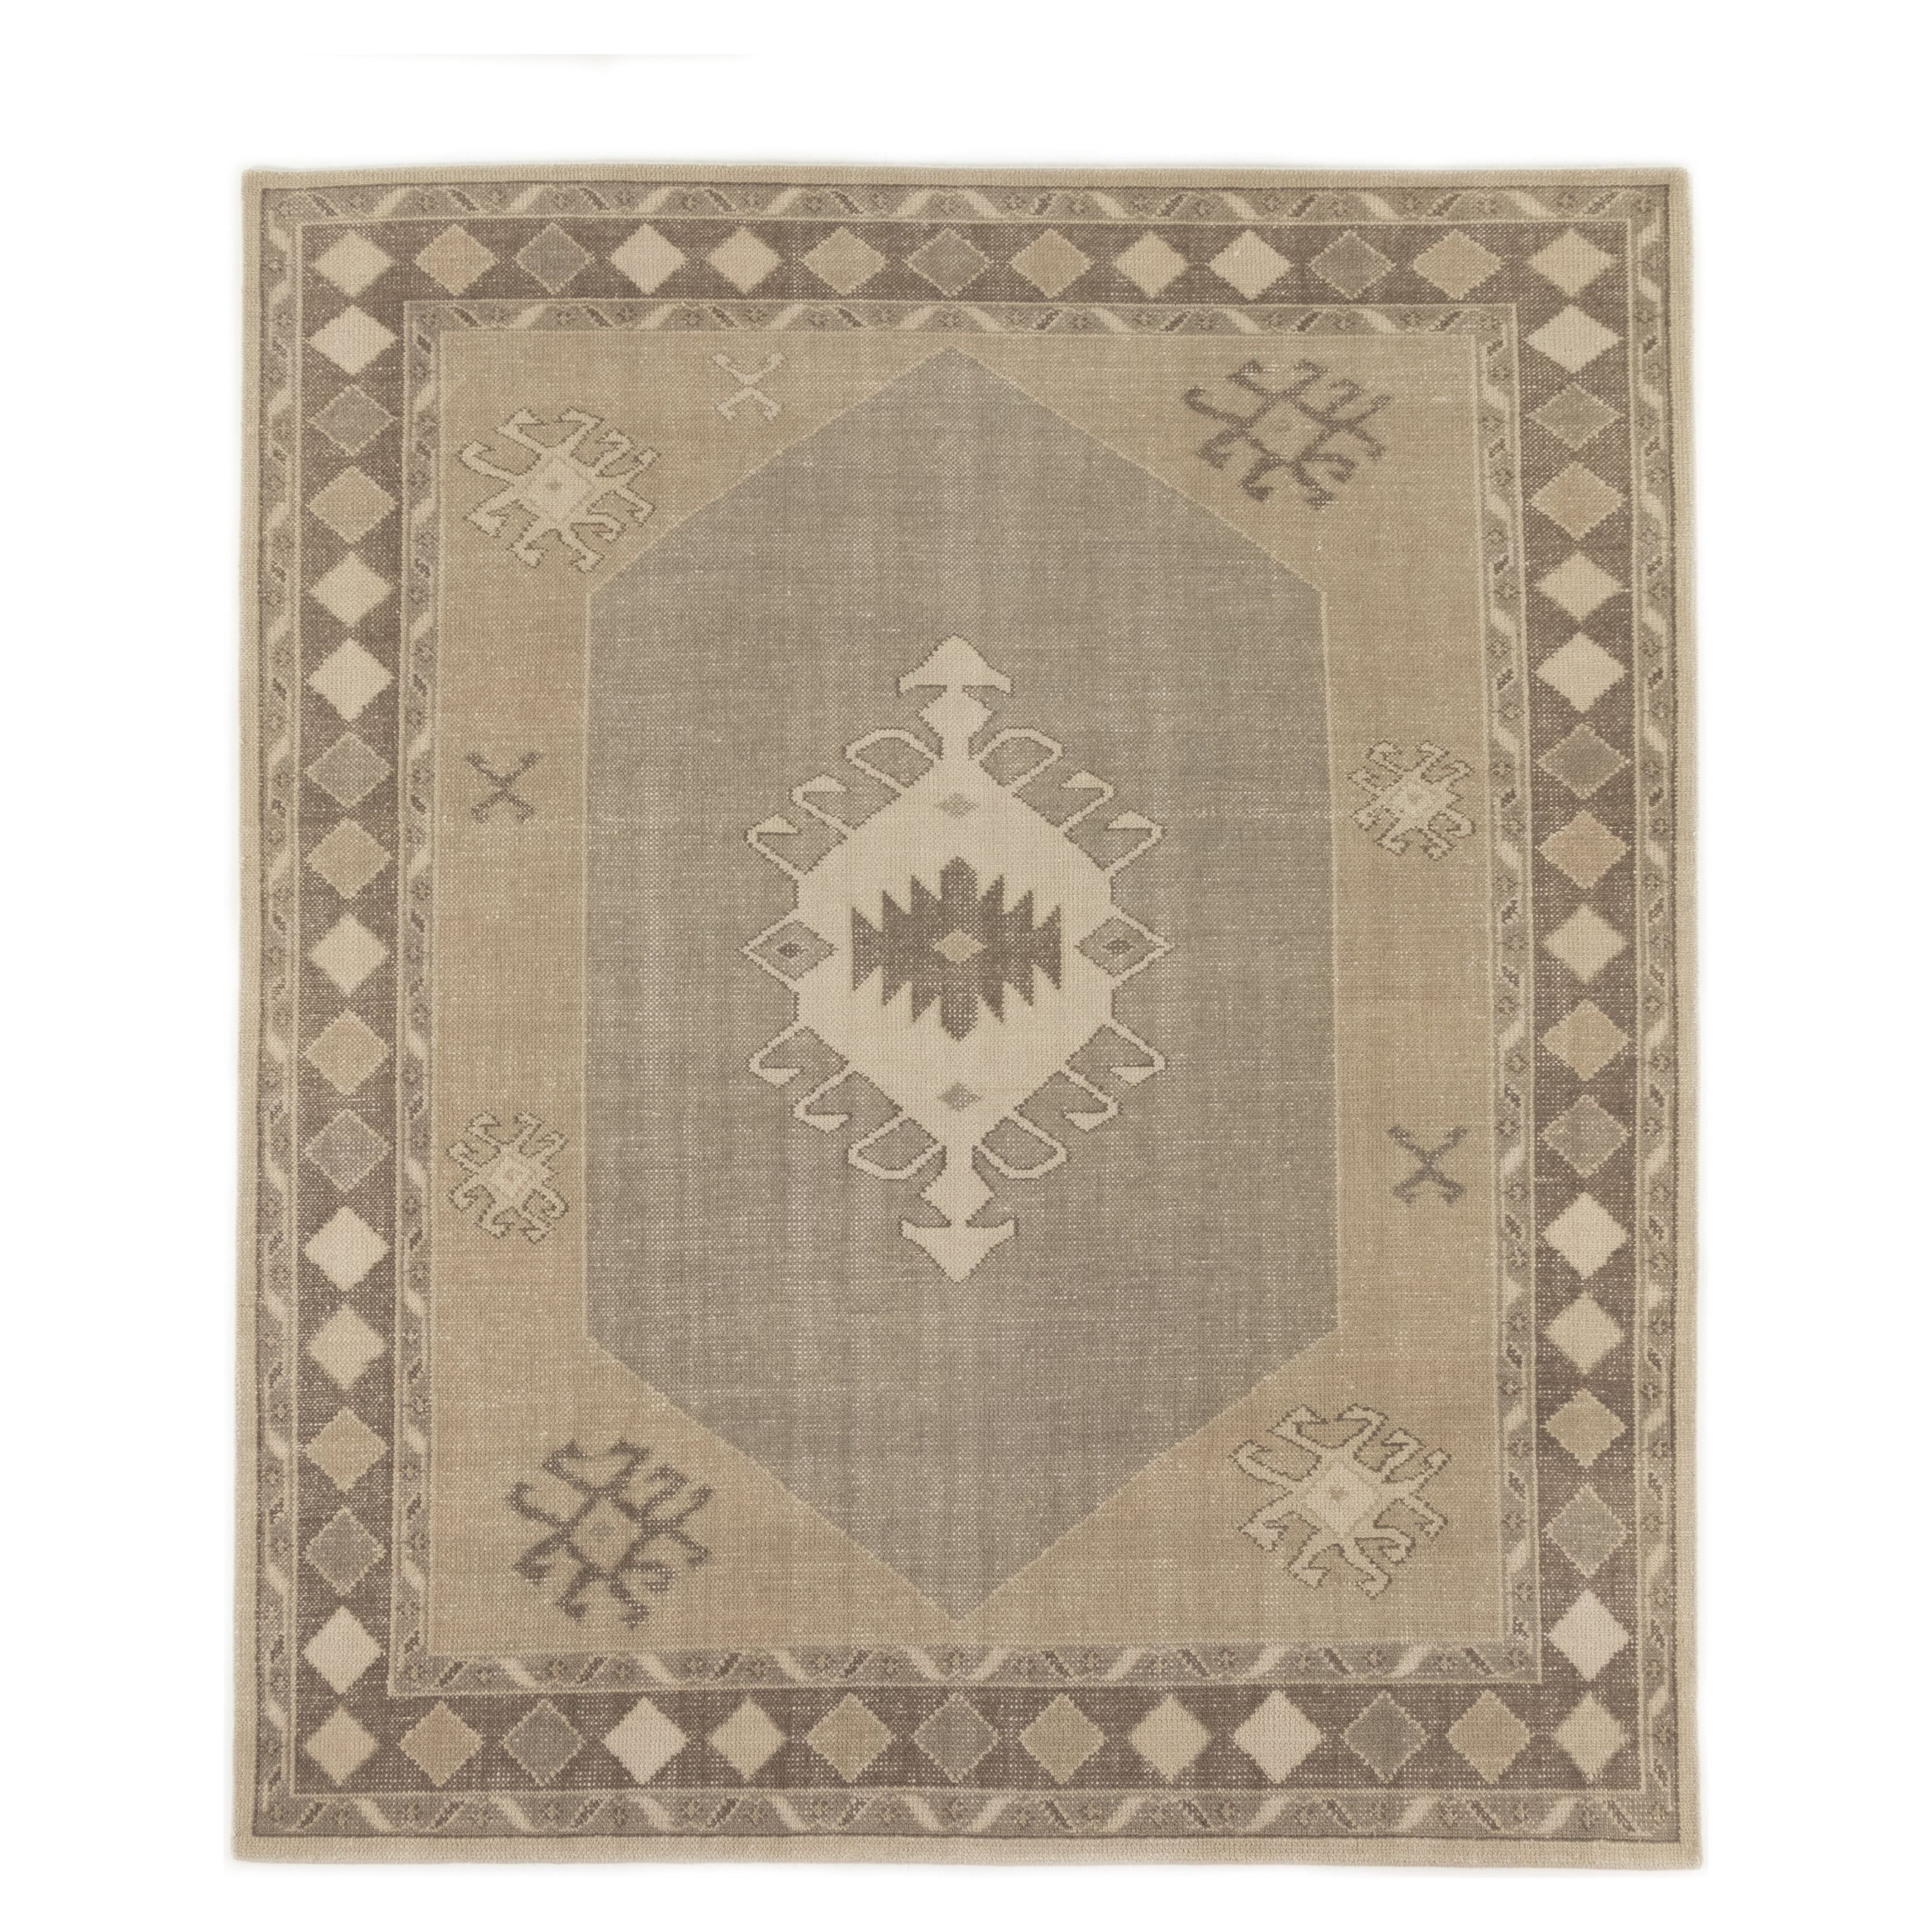 Inspired by traditional Turkish textiles and patterns, the Samsa hand-knotted area rug is made from a beautiful blend of classic cotton and luxurious New Zealand wool, with unique, intricate motifs that seem to speak a story all their own. Amethyst Home provides interior design services for homes, new construction, furniture, rugs, lighting, and more to help you in the Omaha metro area.